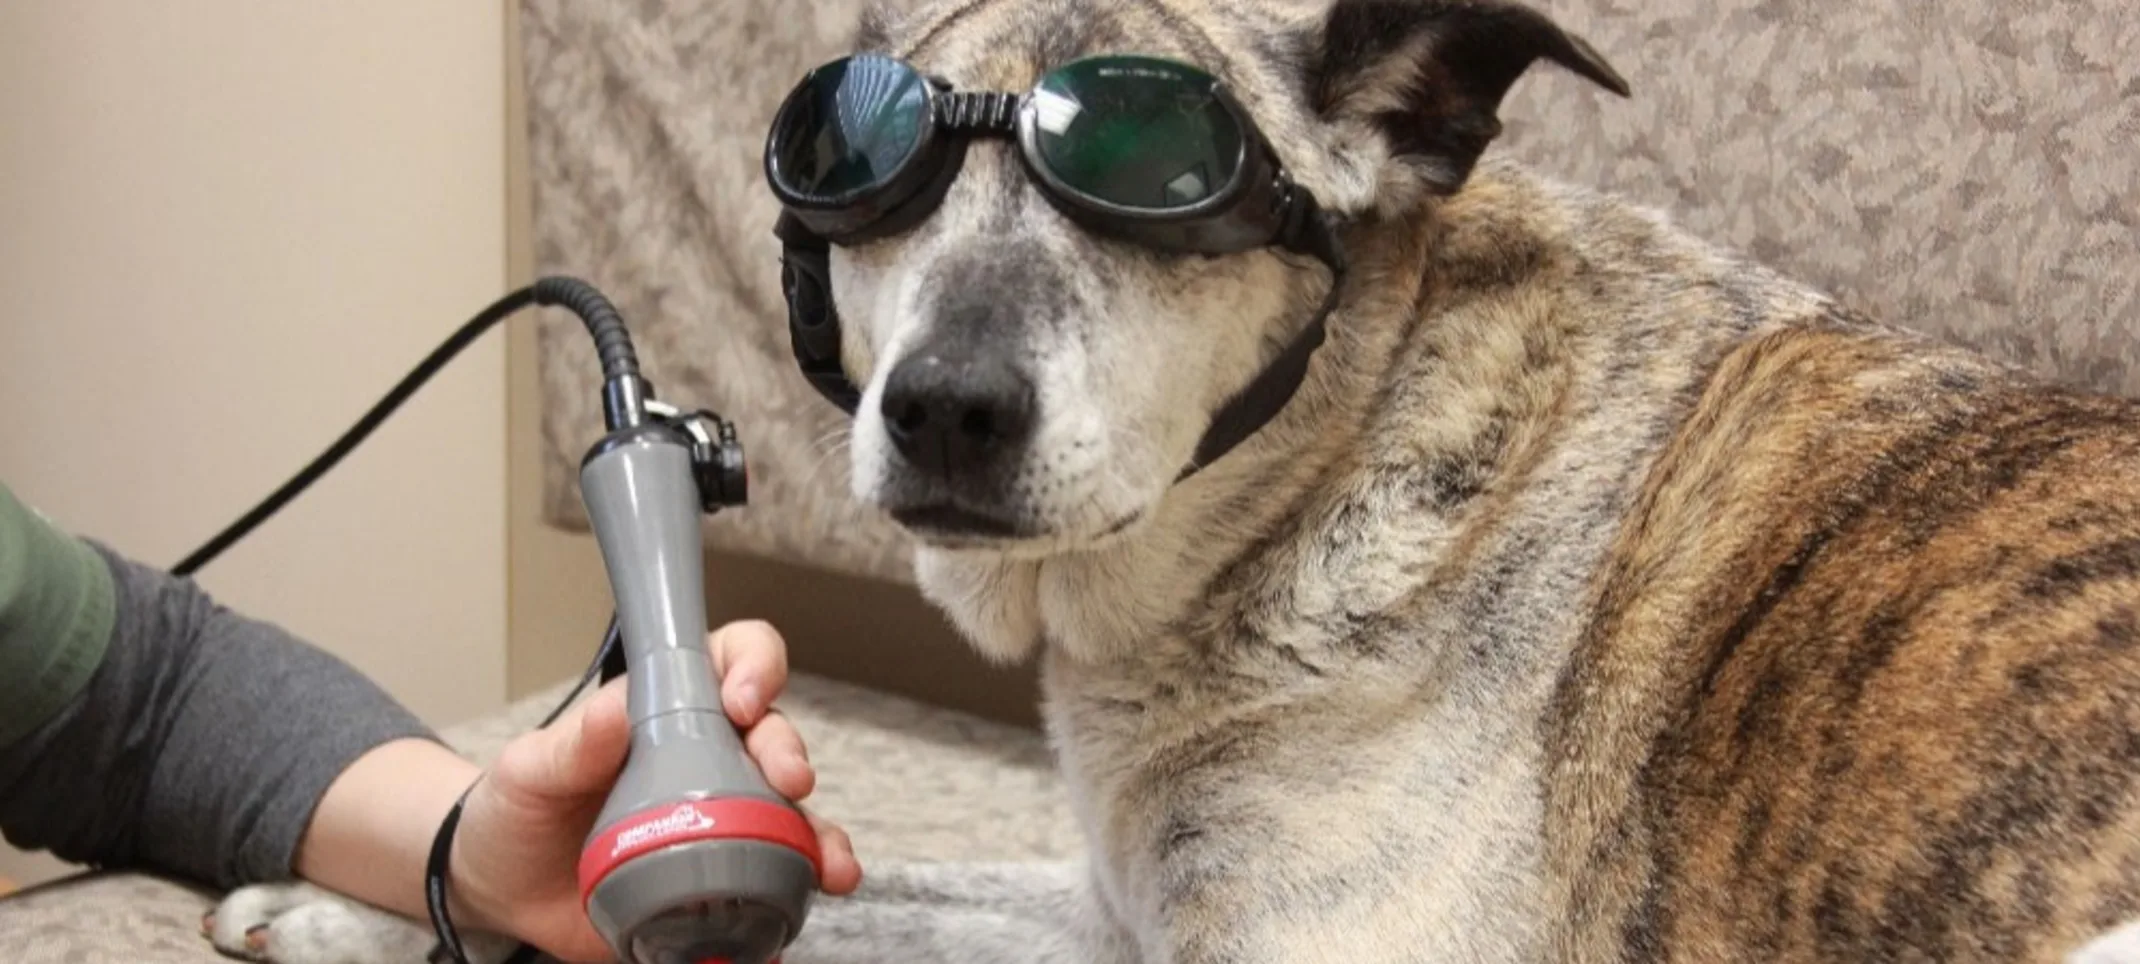 Dog receiving Laser Therapy